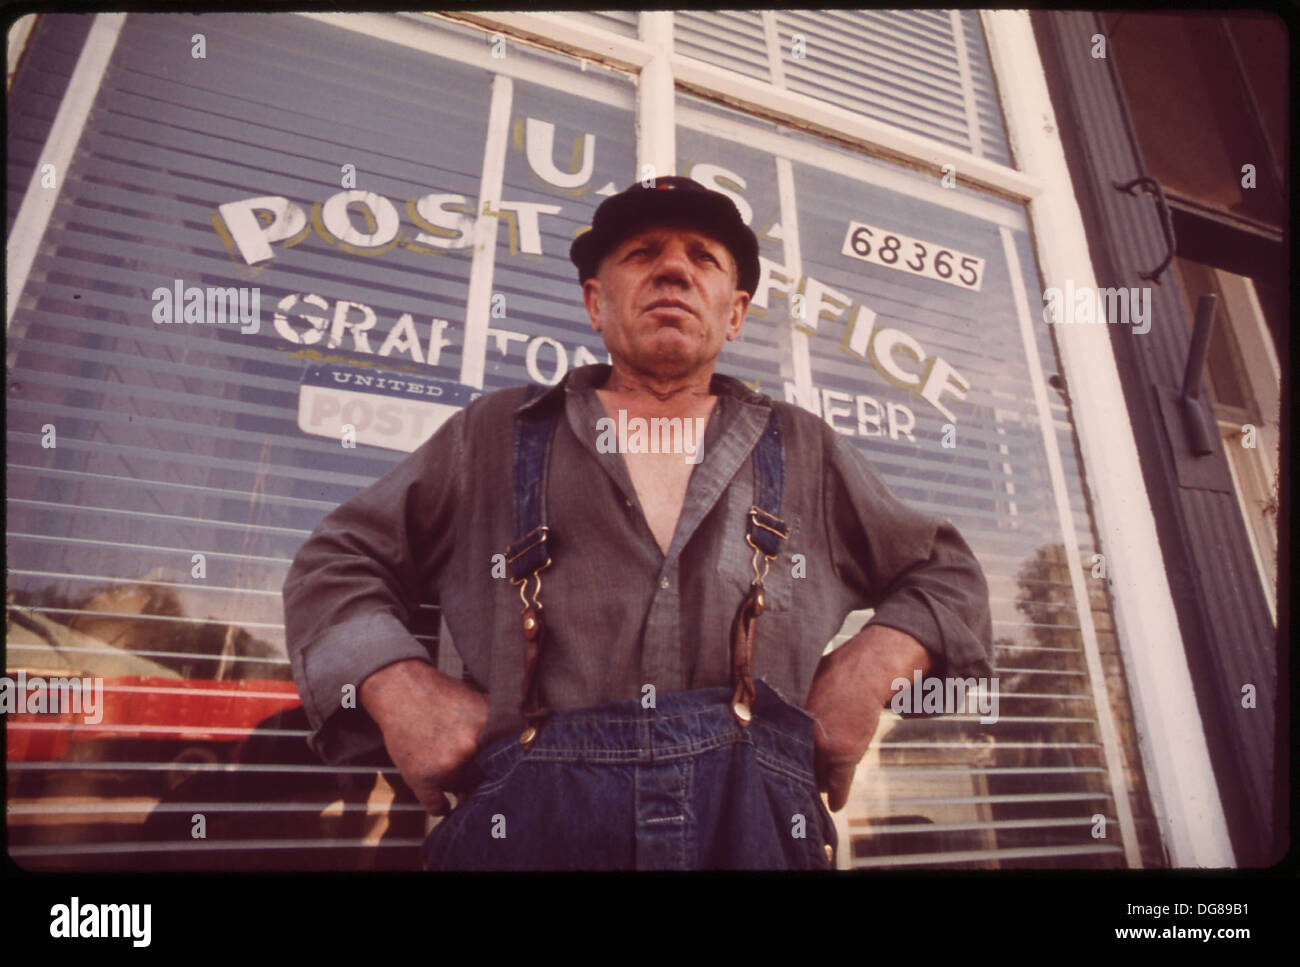 CHARLIE GROSS OUTSIDE GRAFTON POST OFFICE. A FORMER FARMER TRUCK DRIVER, BOXER, DOG RAISER AND SALESMAN, HE HAS LIVED... 547325 Stock Photo